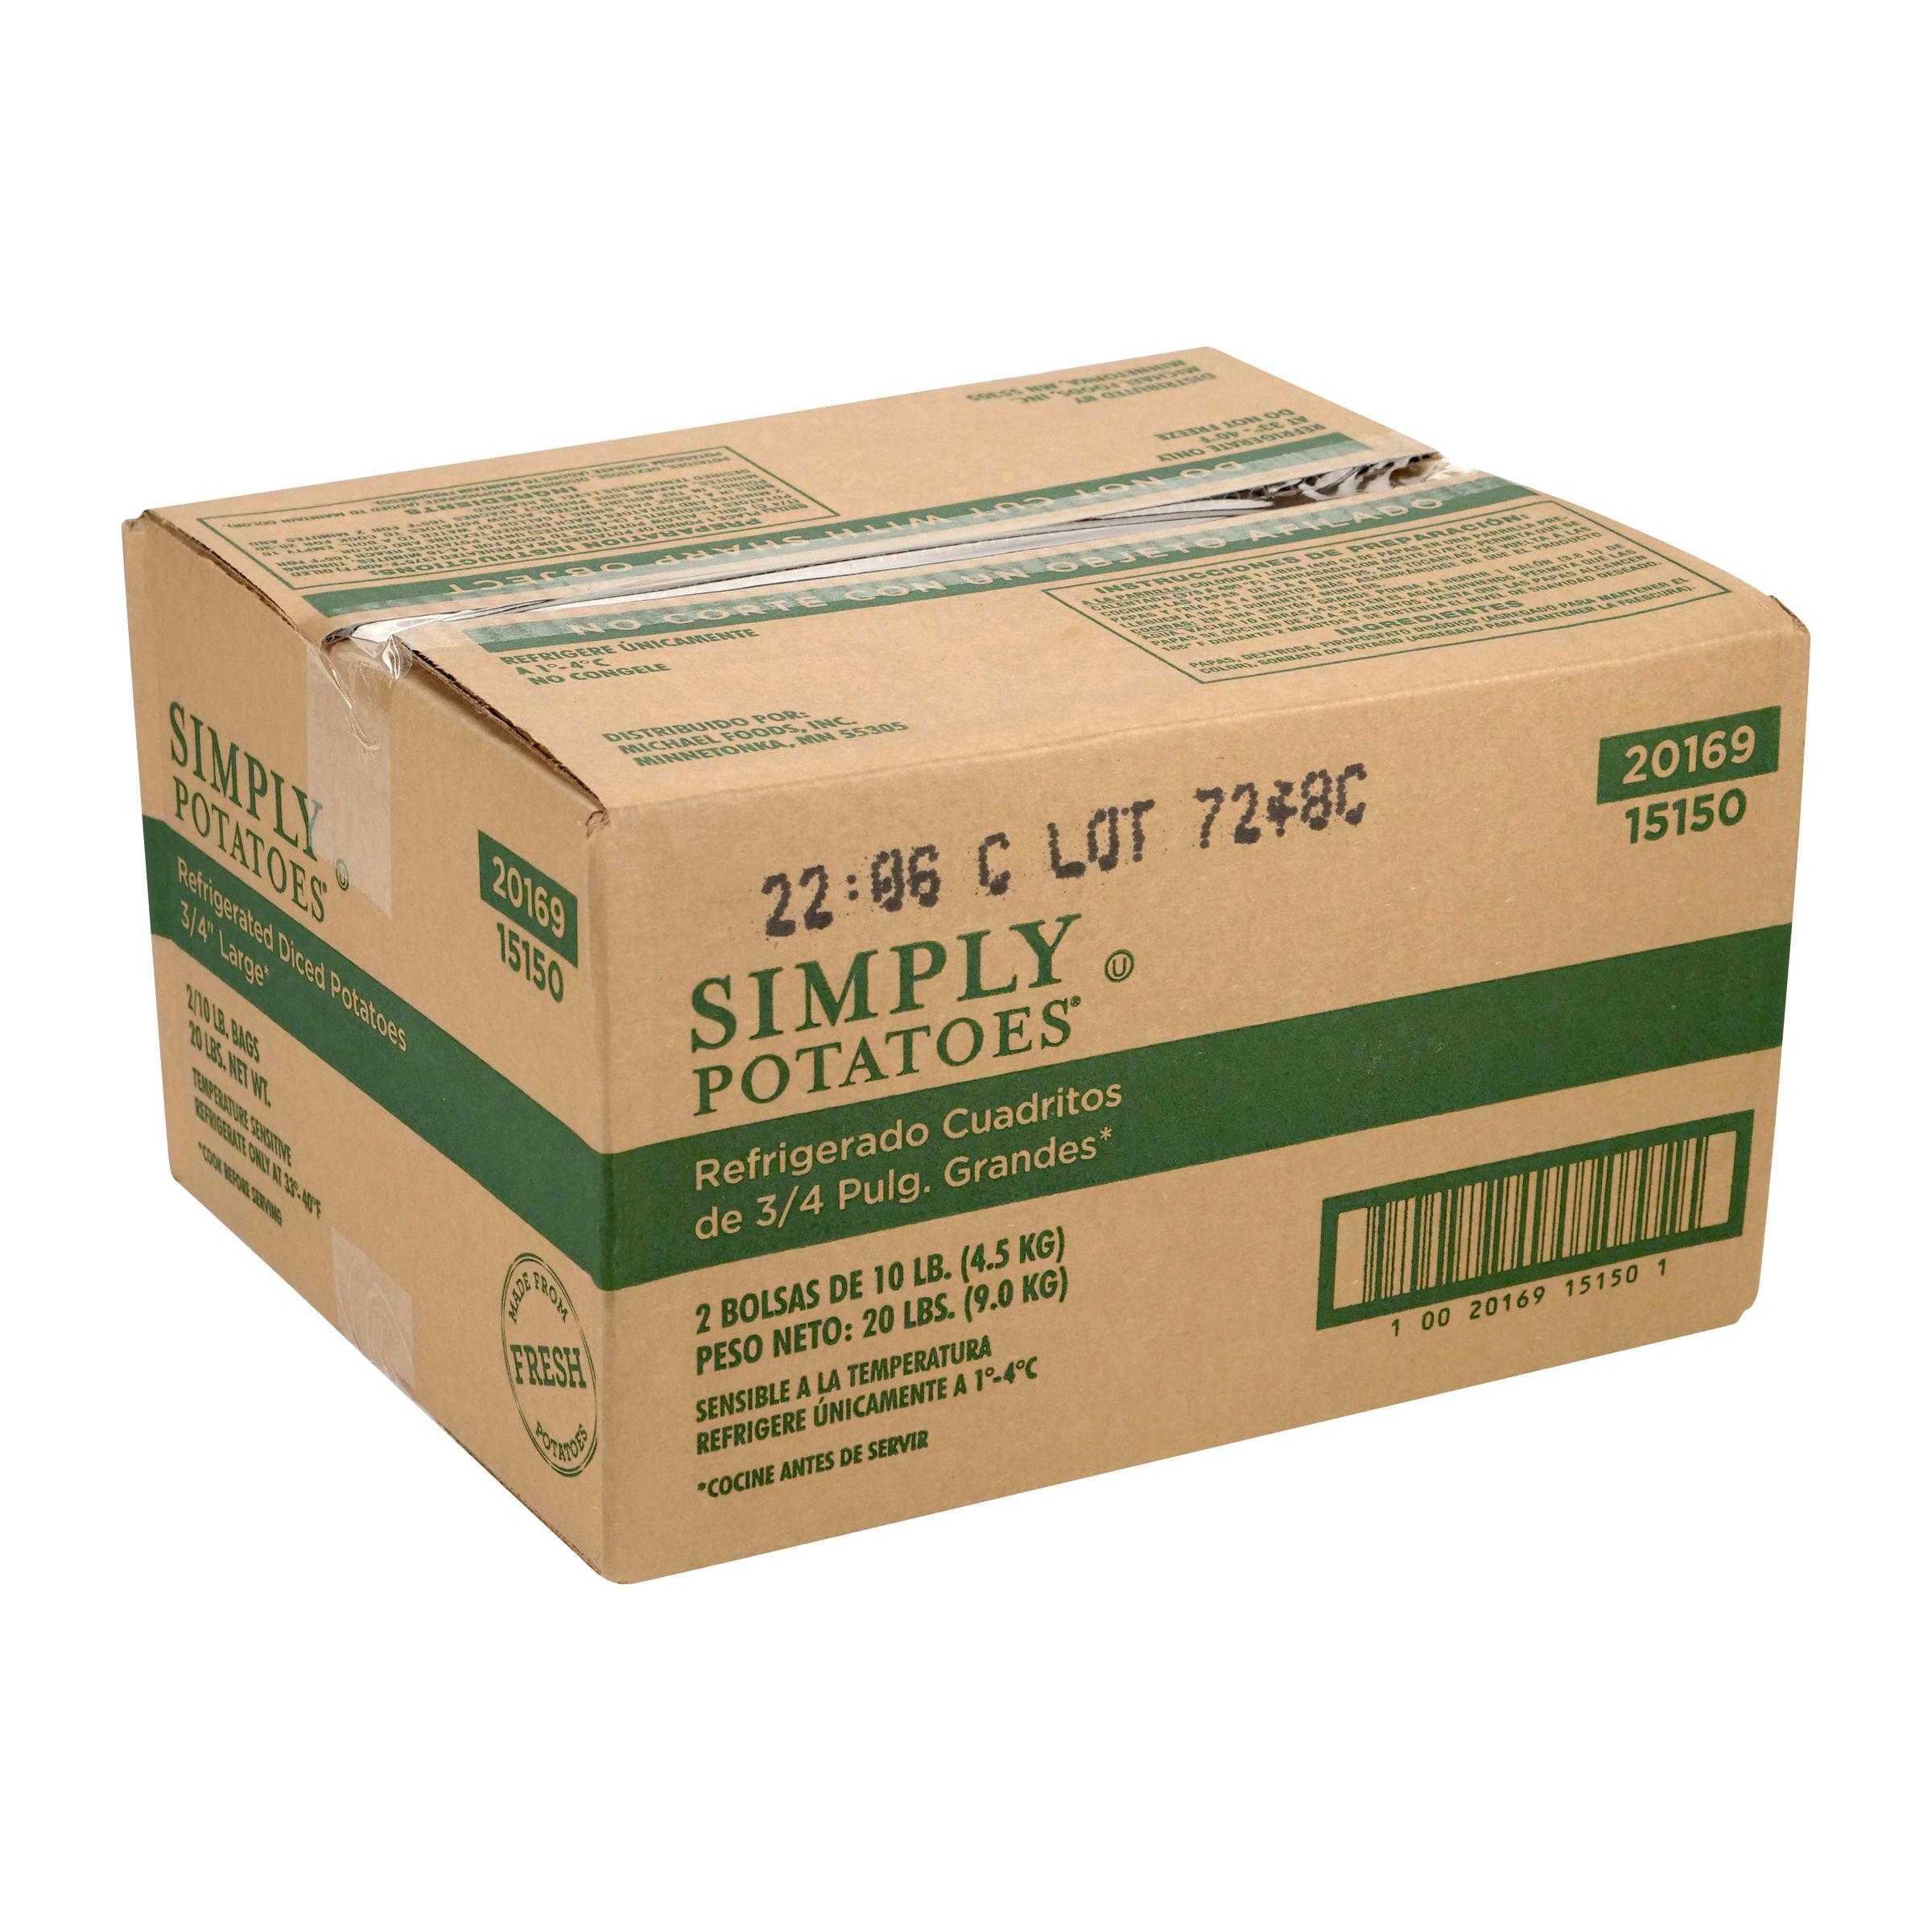 Simply Potatoes® Refrigerated 3/4″ Diced Potatoes made with peeled Russet potatoes diced dimensions 3/4″ x 3/4″ x 5/8″, 2/10 Lb Bags